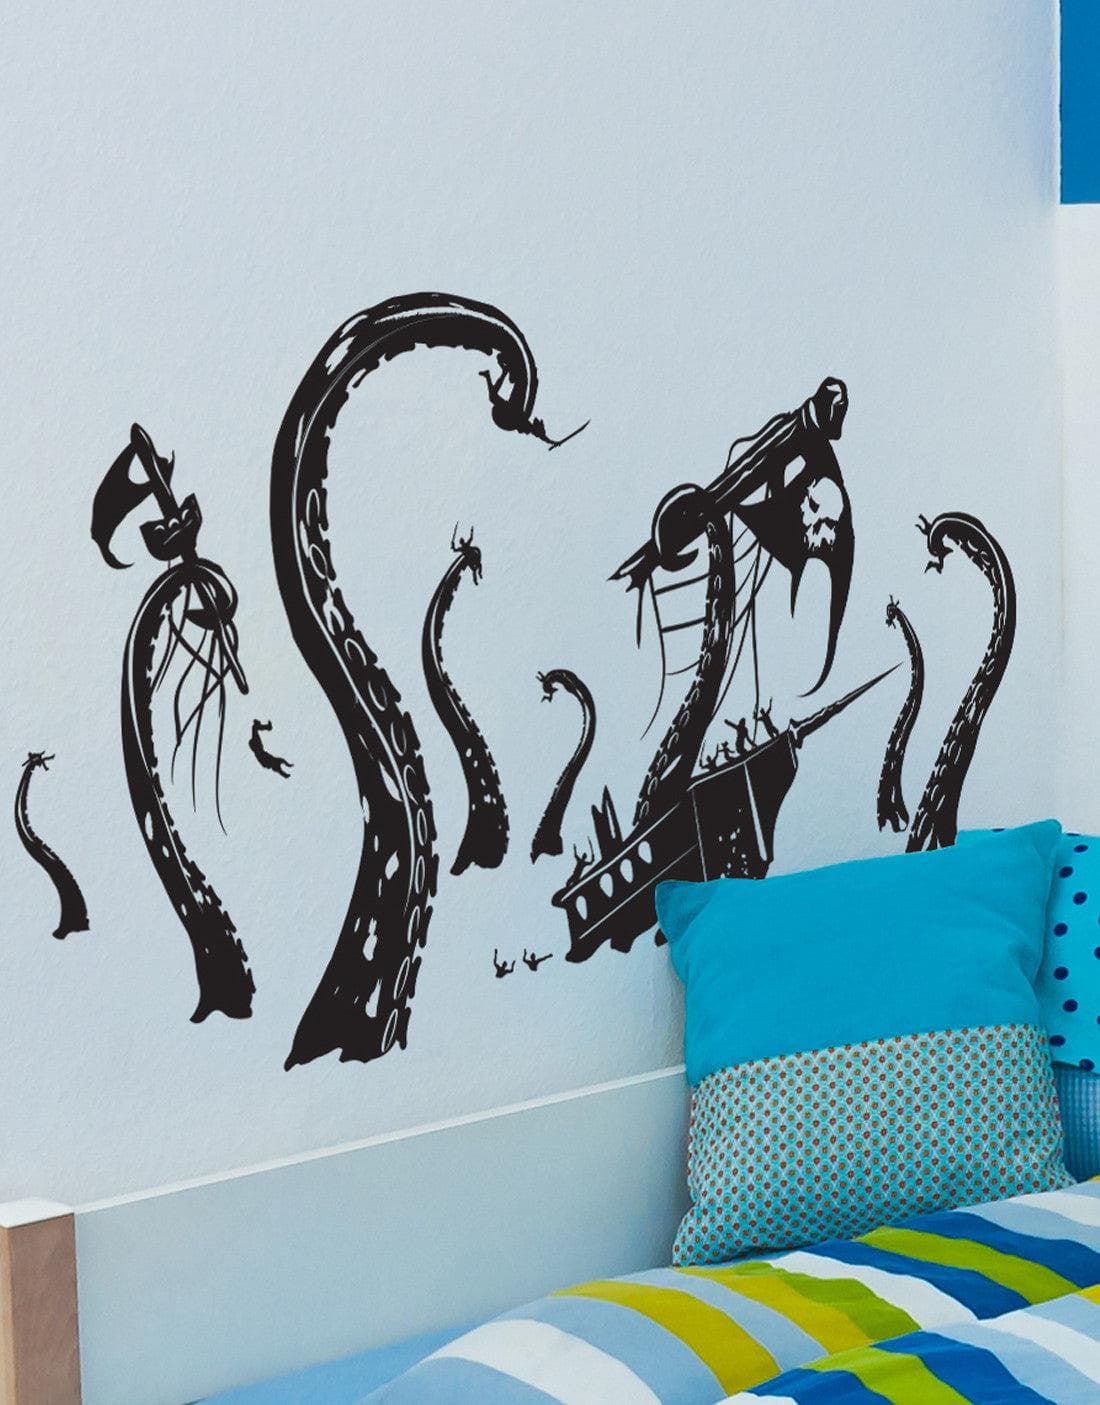 A black kraken and pirate ship decal on a white wall above a blue bed.